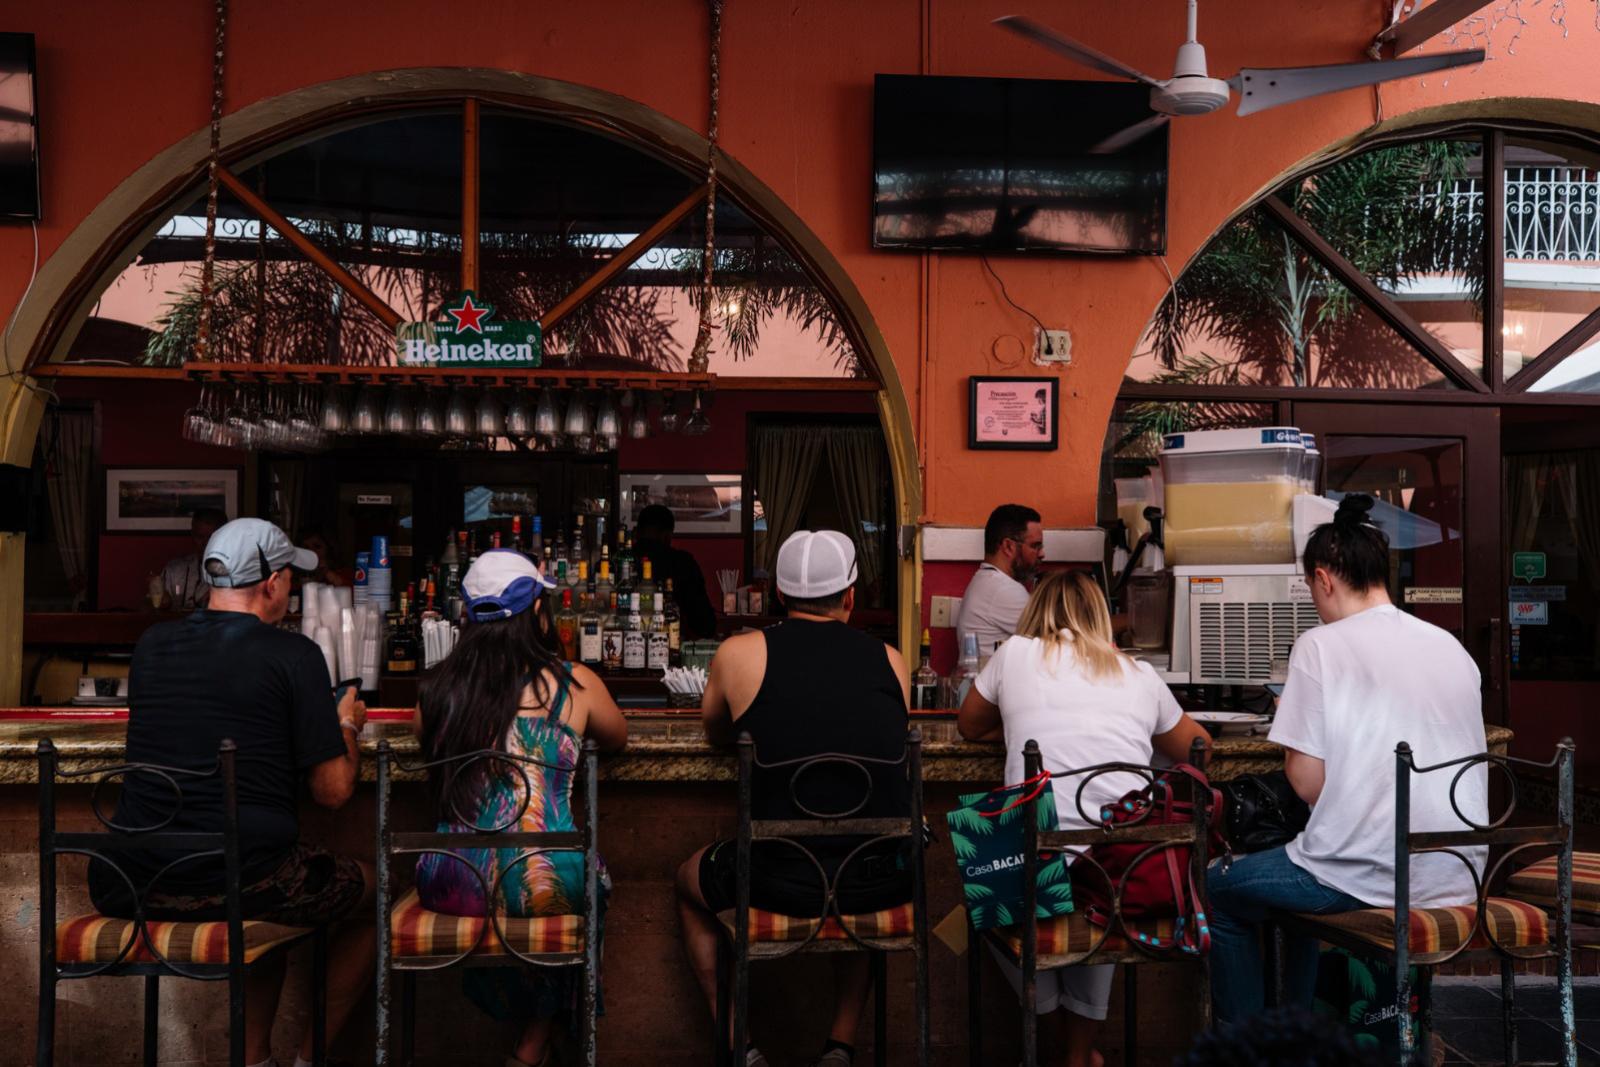 View of a restaurant's bar in Old San Juan.